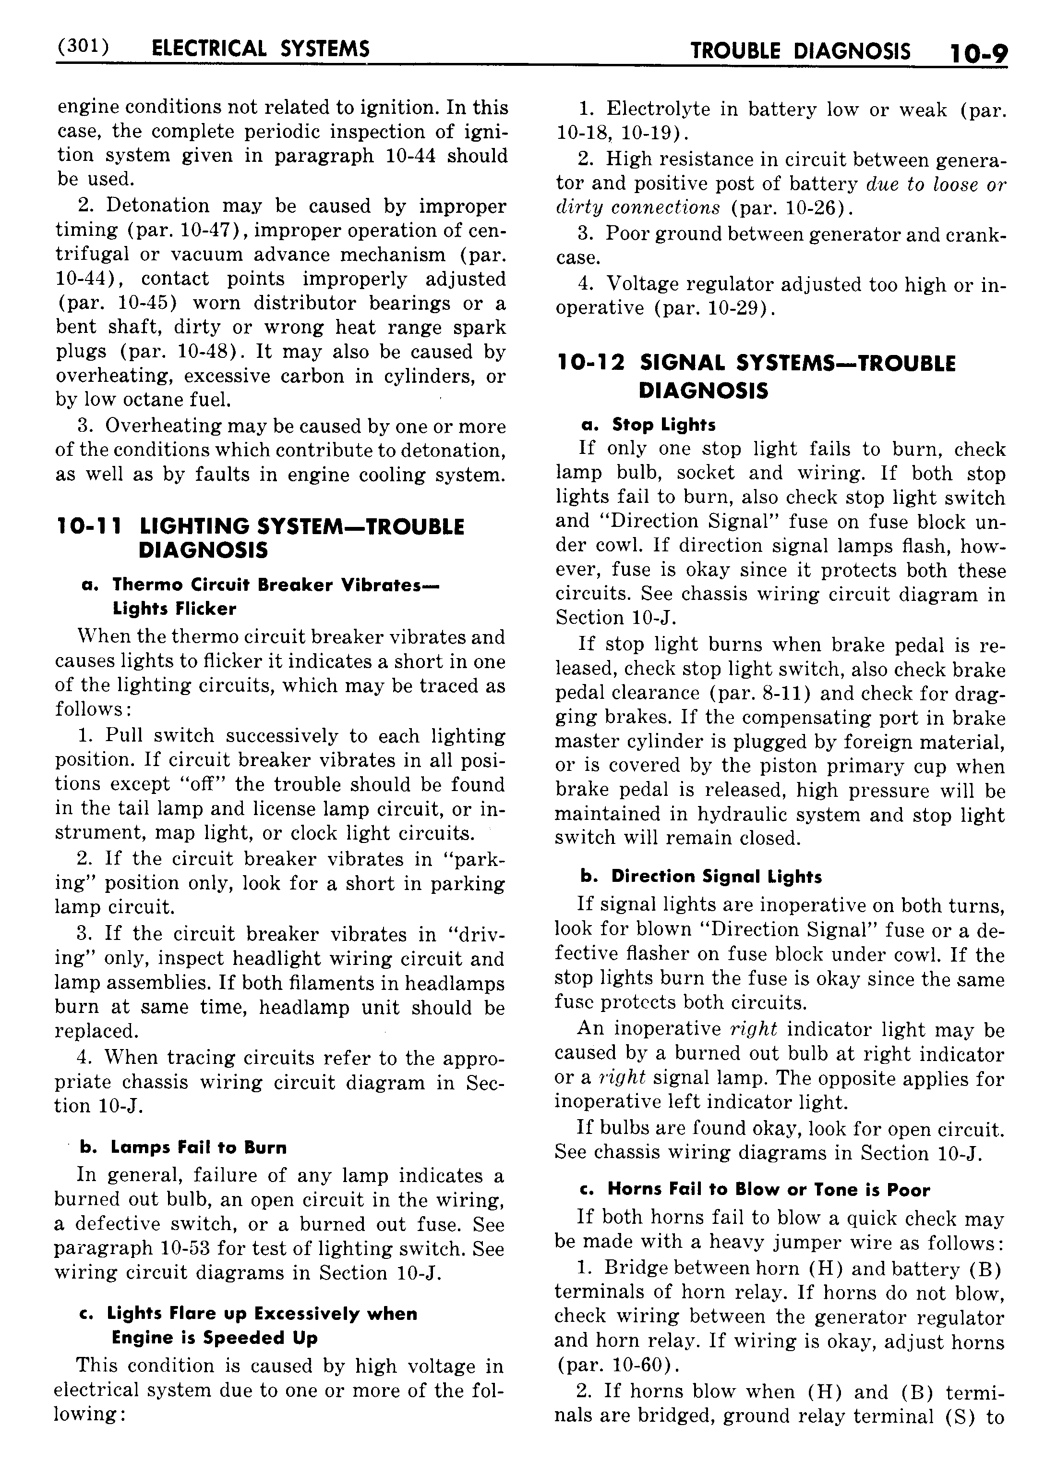 n_11 1951 Buick Shop Manual - Electrical Systems-009-009.jpg